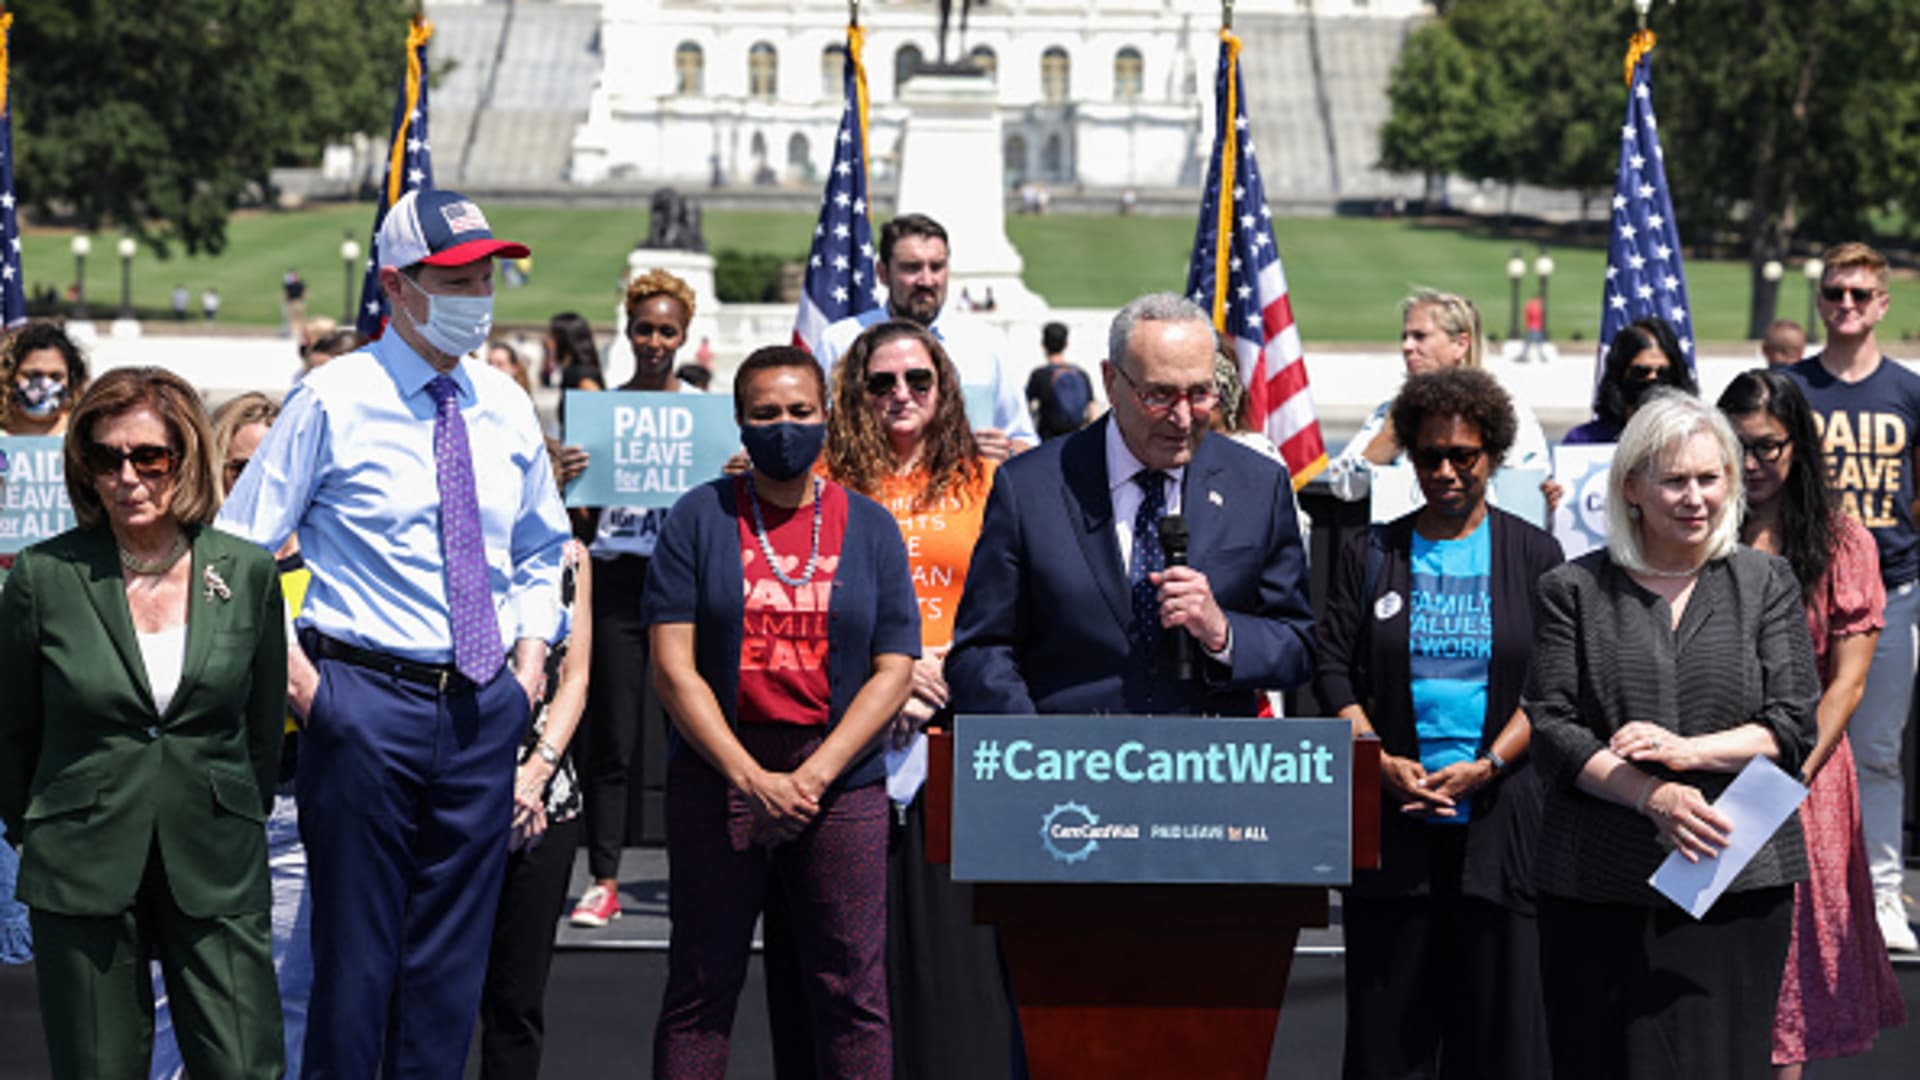 Senate Majority Leader Chuck Schumer, D-N.Y., at a rally organized by the “Paid Leave for All” cross-country bus tour on Aug. 4, 2021 in Washington, D.C.